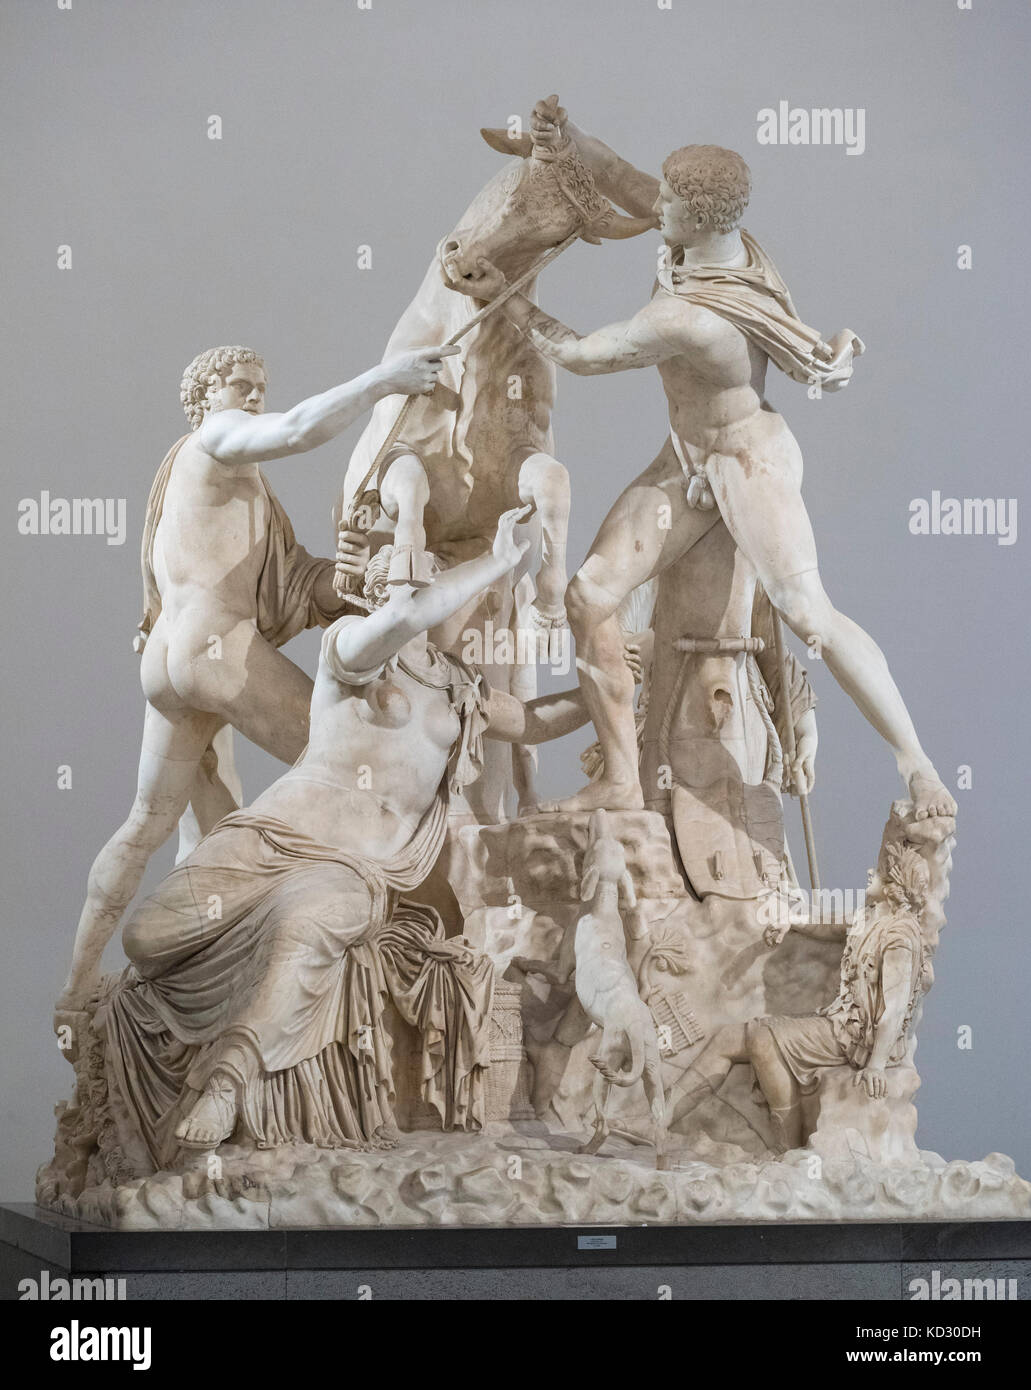 Naples. Italy. The Farnese Bull (2nd/3rd C A.D.), from the Terme di Caracalla. Museo Archeologico Nazionale di Napoli. National Archaeology Museum Stock Photo